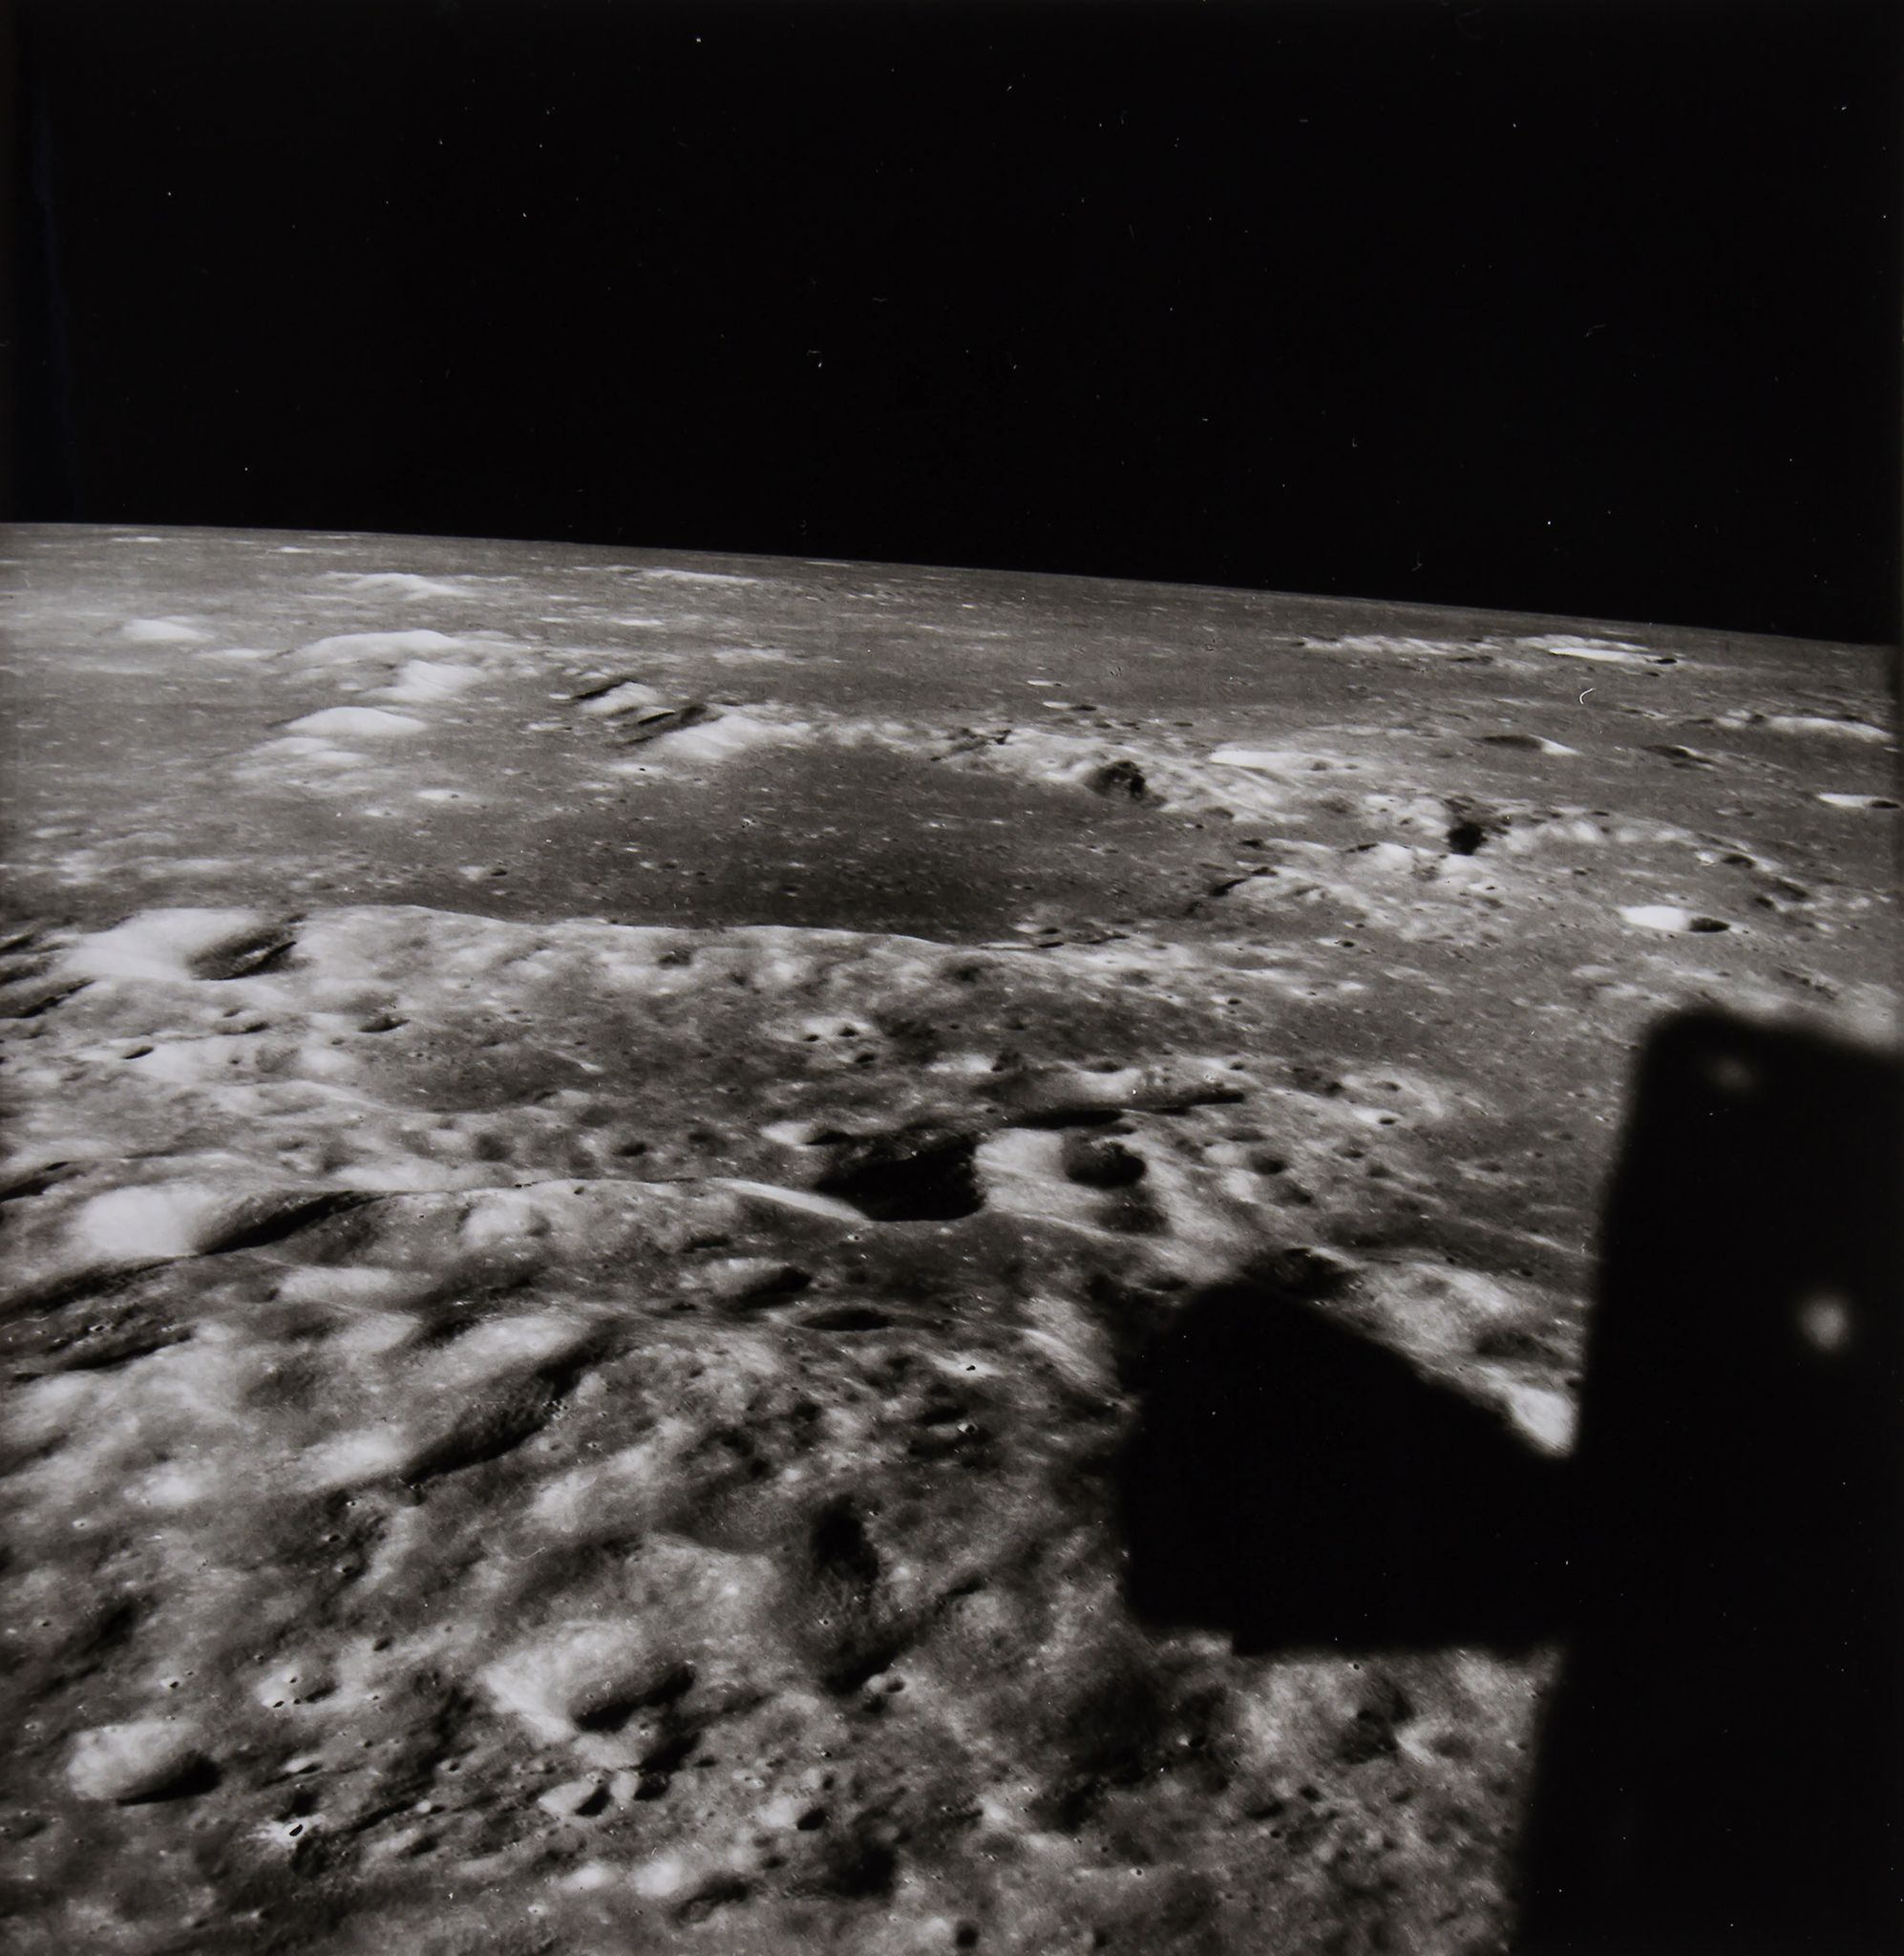 The Lunar Module’s approach to the possible Apollo 11 landing site, orbital landscapes seen from the - Image 2 of 2